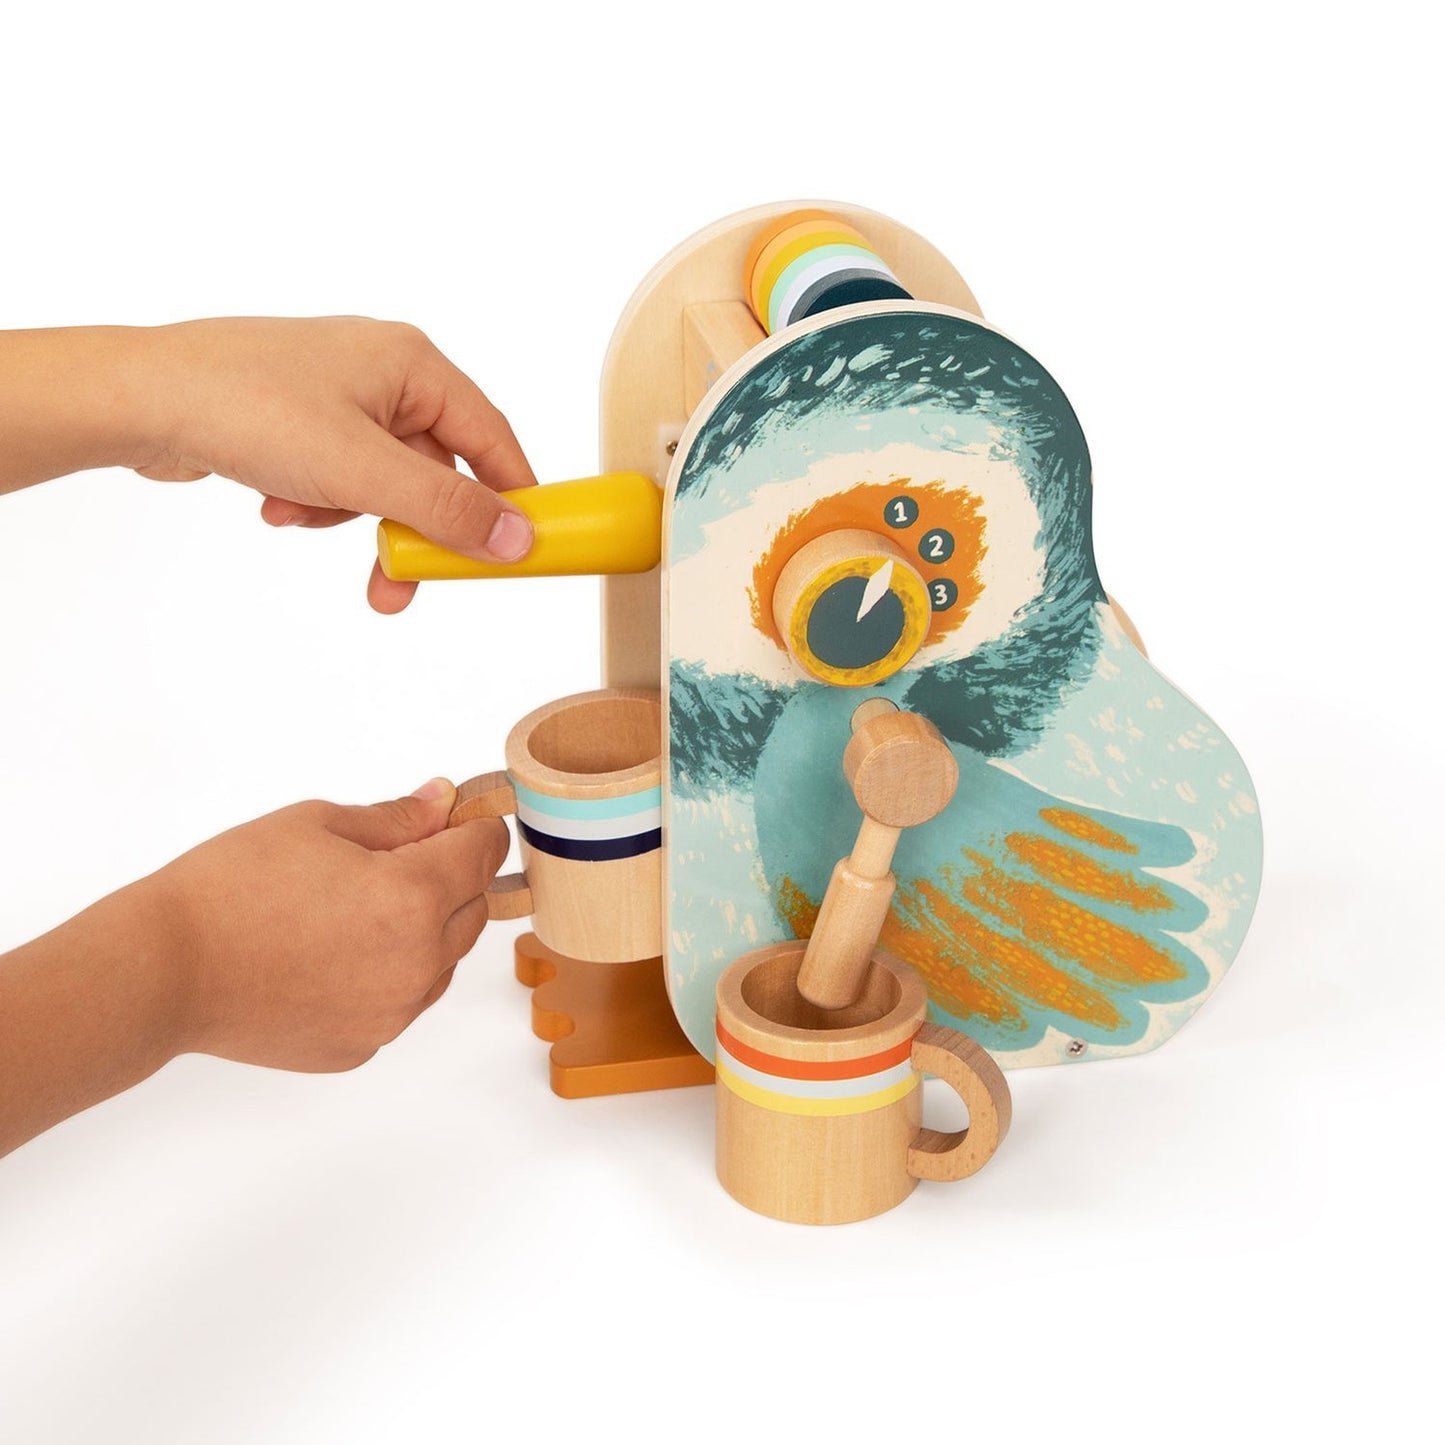 Early Bird Espresso by Manhattan Toy - Wood Wood Toys Canada's Favourite Montessori Toy Store